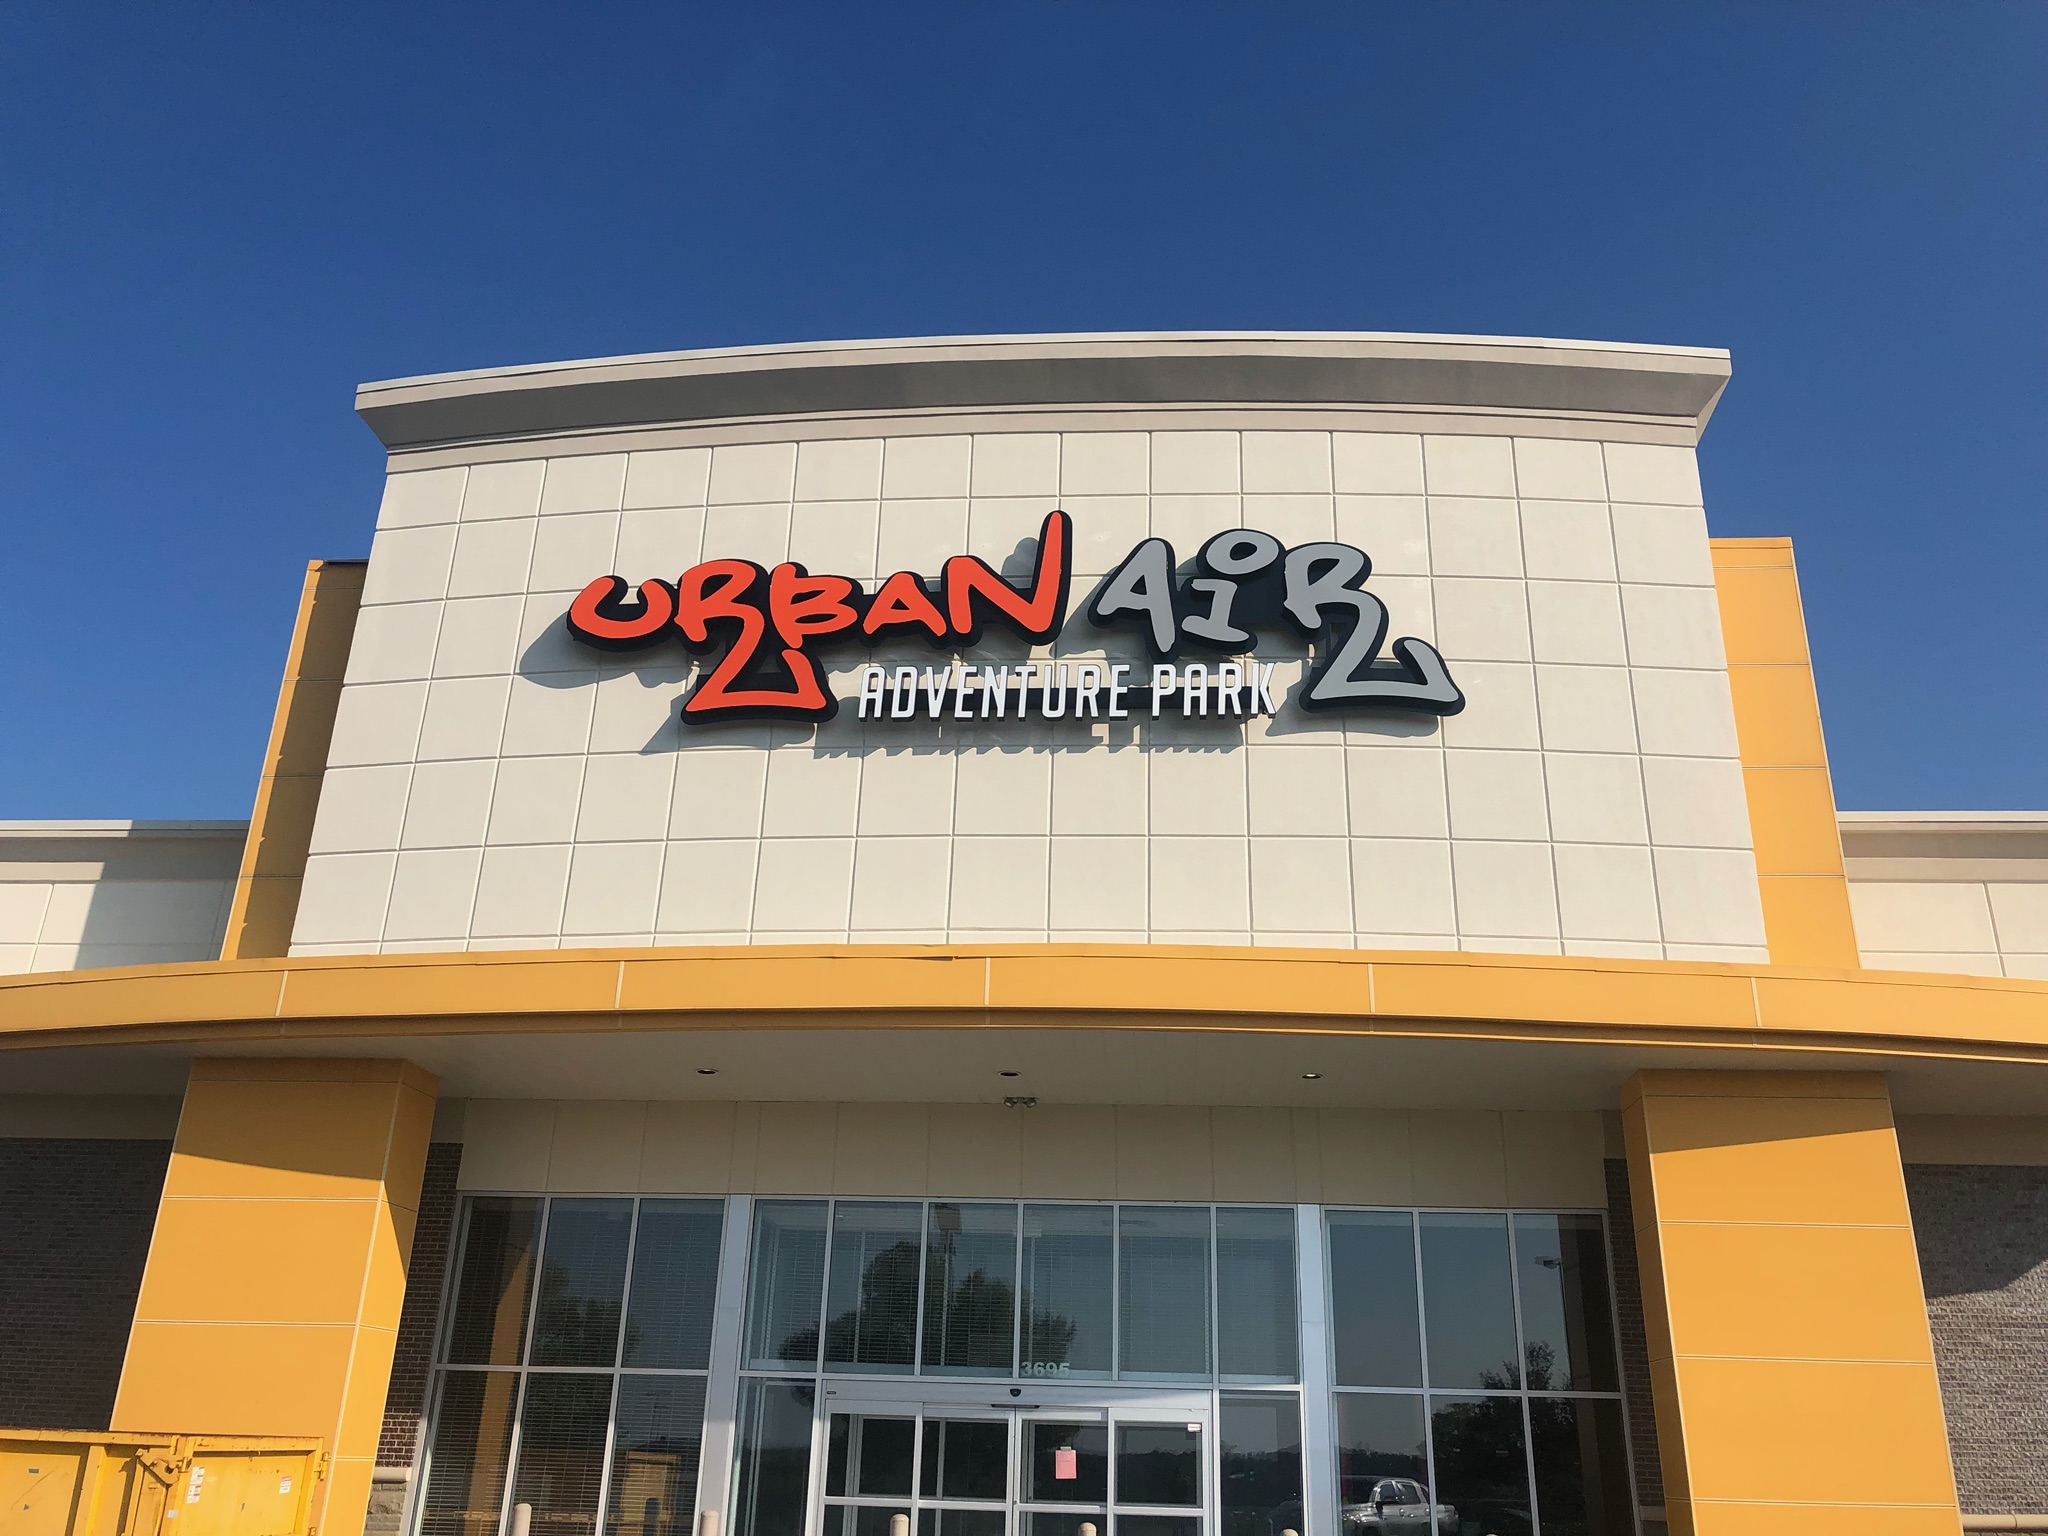 Trussville Urban Air owners aim for August opening